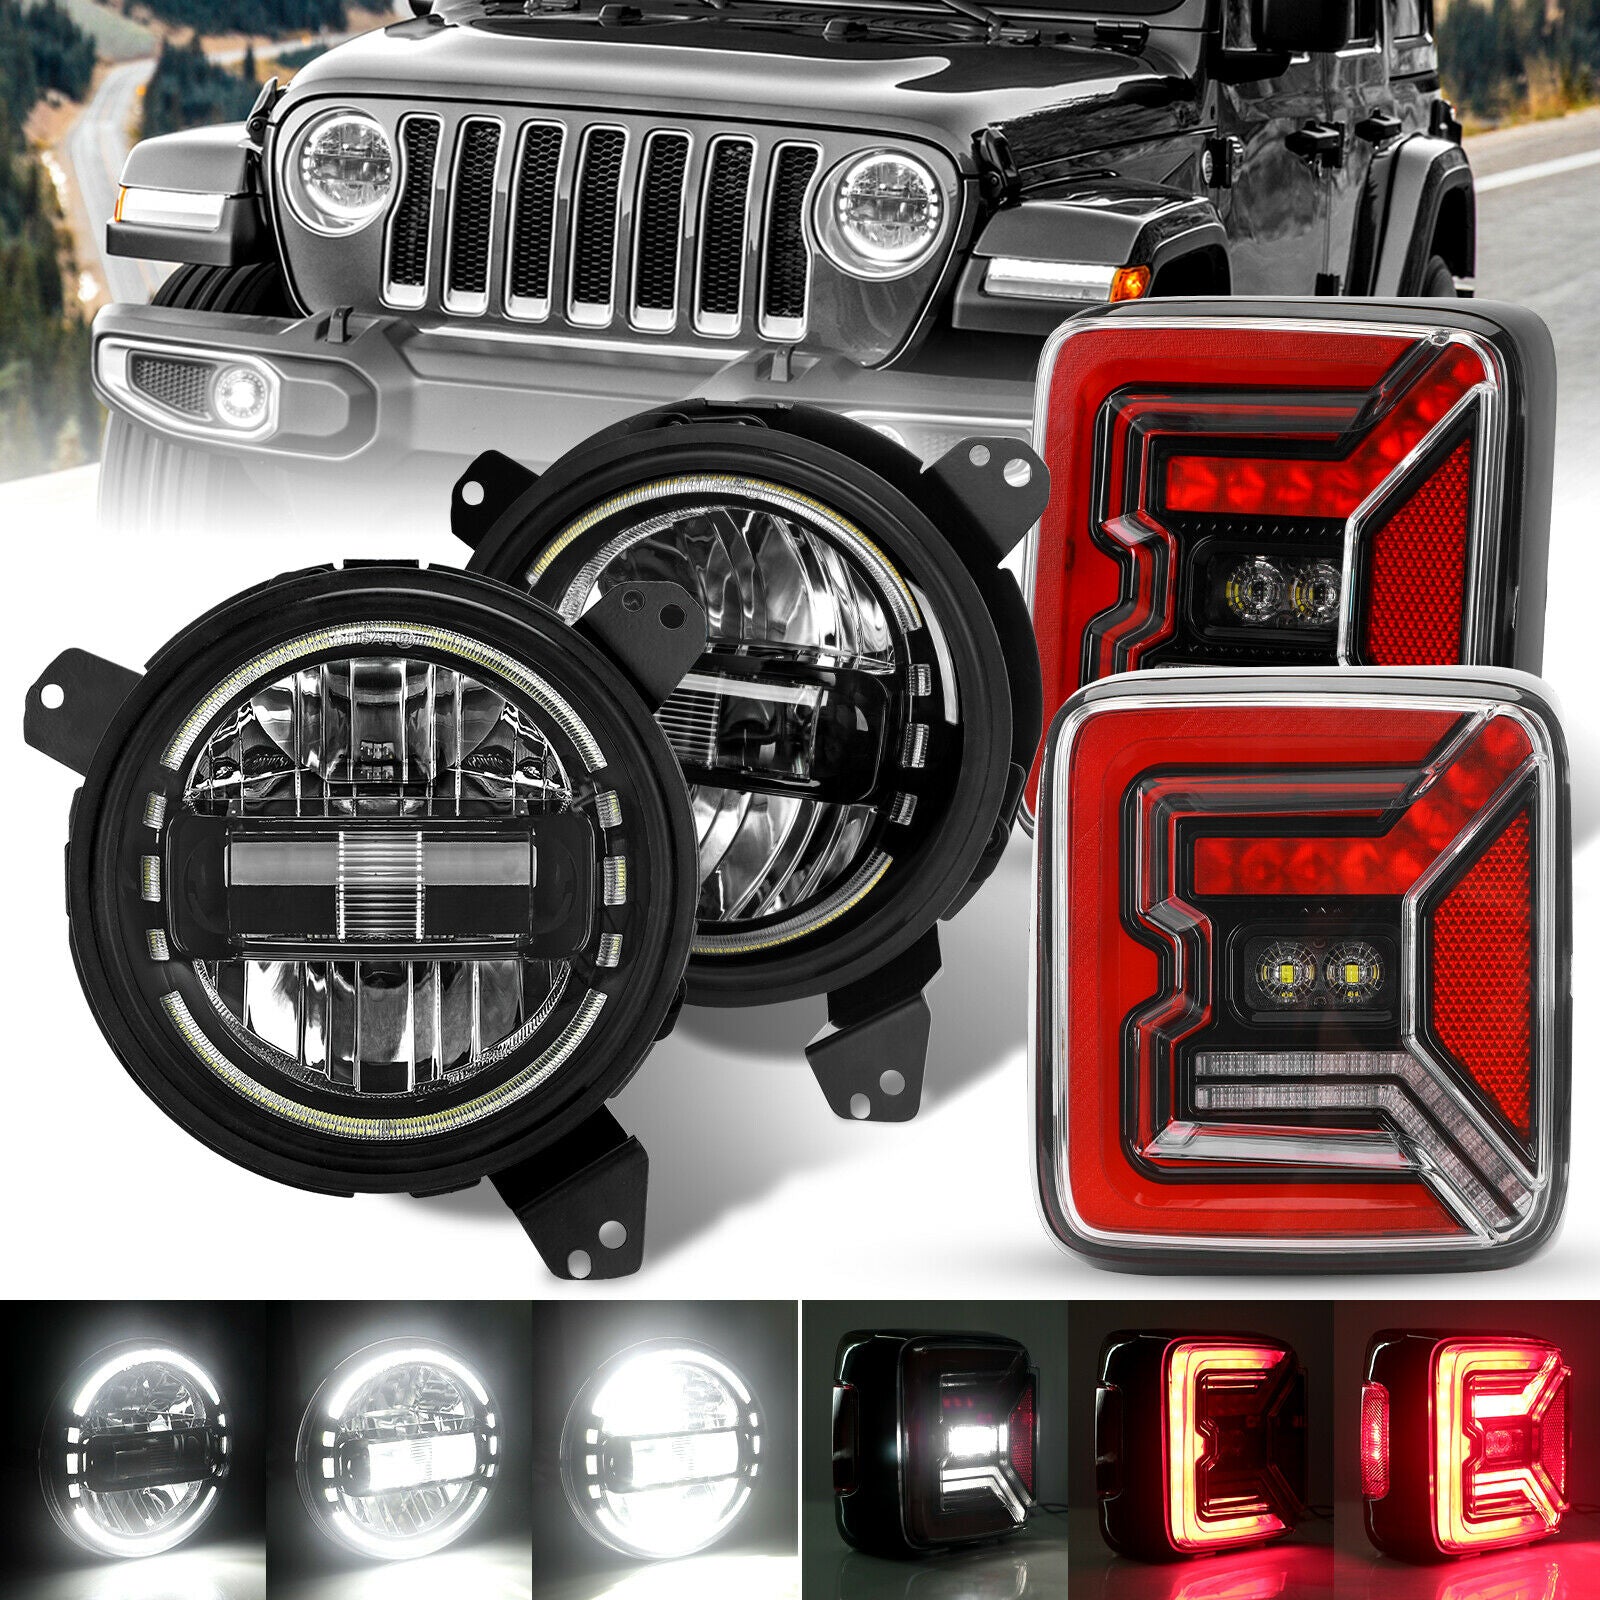 Black Housing 9 Inch Round LED Headlights & Rear Tail Lights Combo Kits for  2018-21 Jeep Wrangler Jl from Weathers Auto Supply